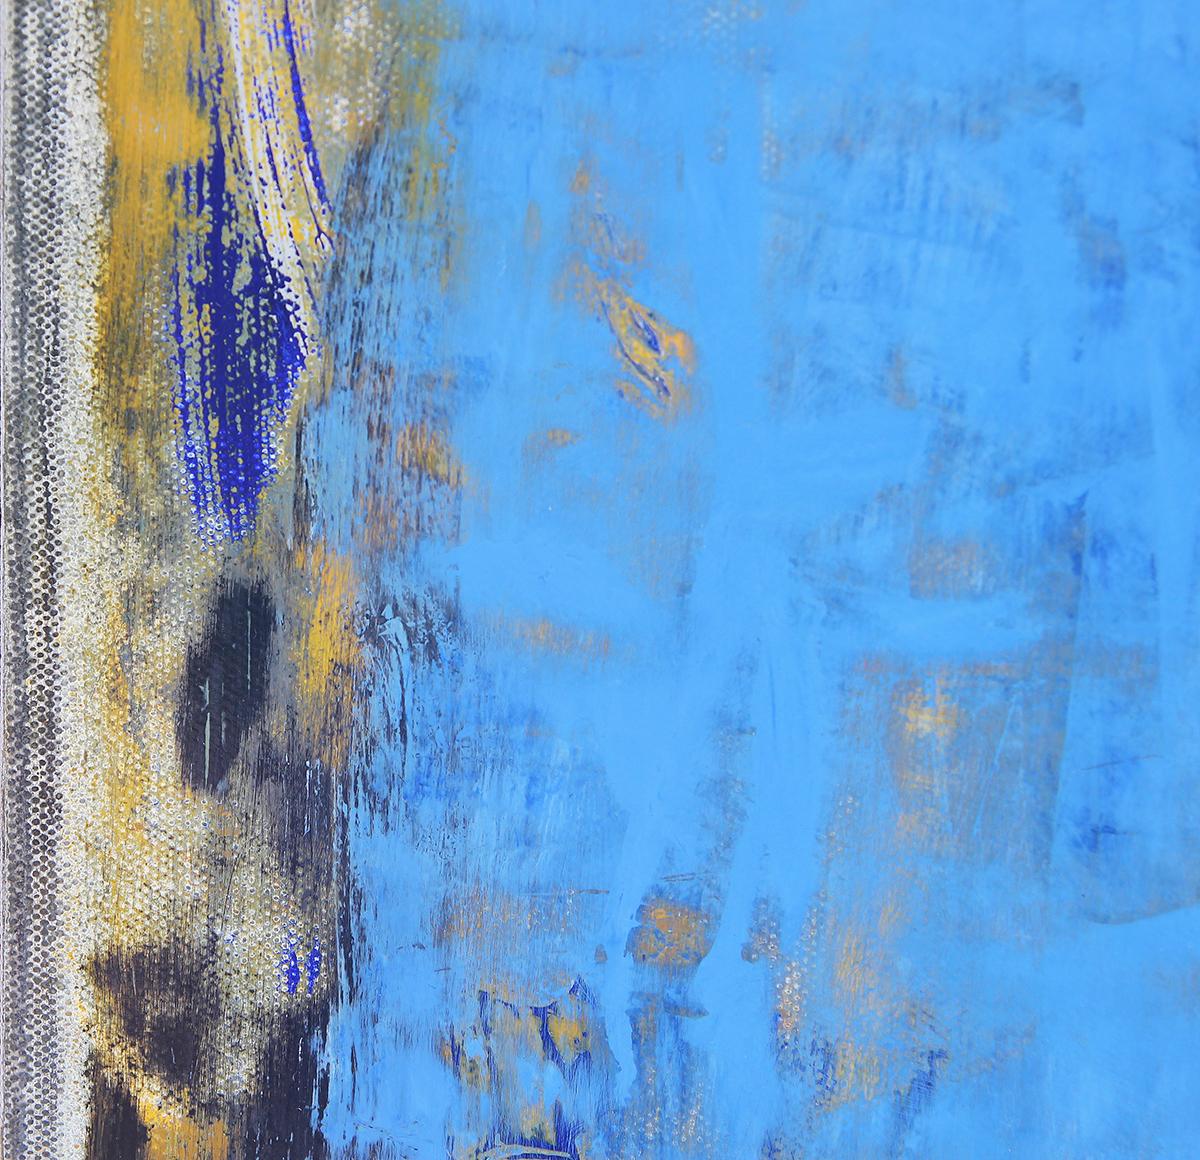 Abstract color field painting by Texas artist Susan Sales. Blue toned abstract expressionist longitudinal painting with yellow, red, and black accents. Signed at the bottom right corner. Unframed but framing options are available.

Artist Biography: